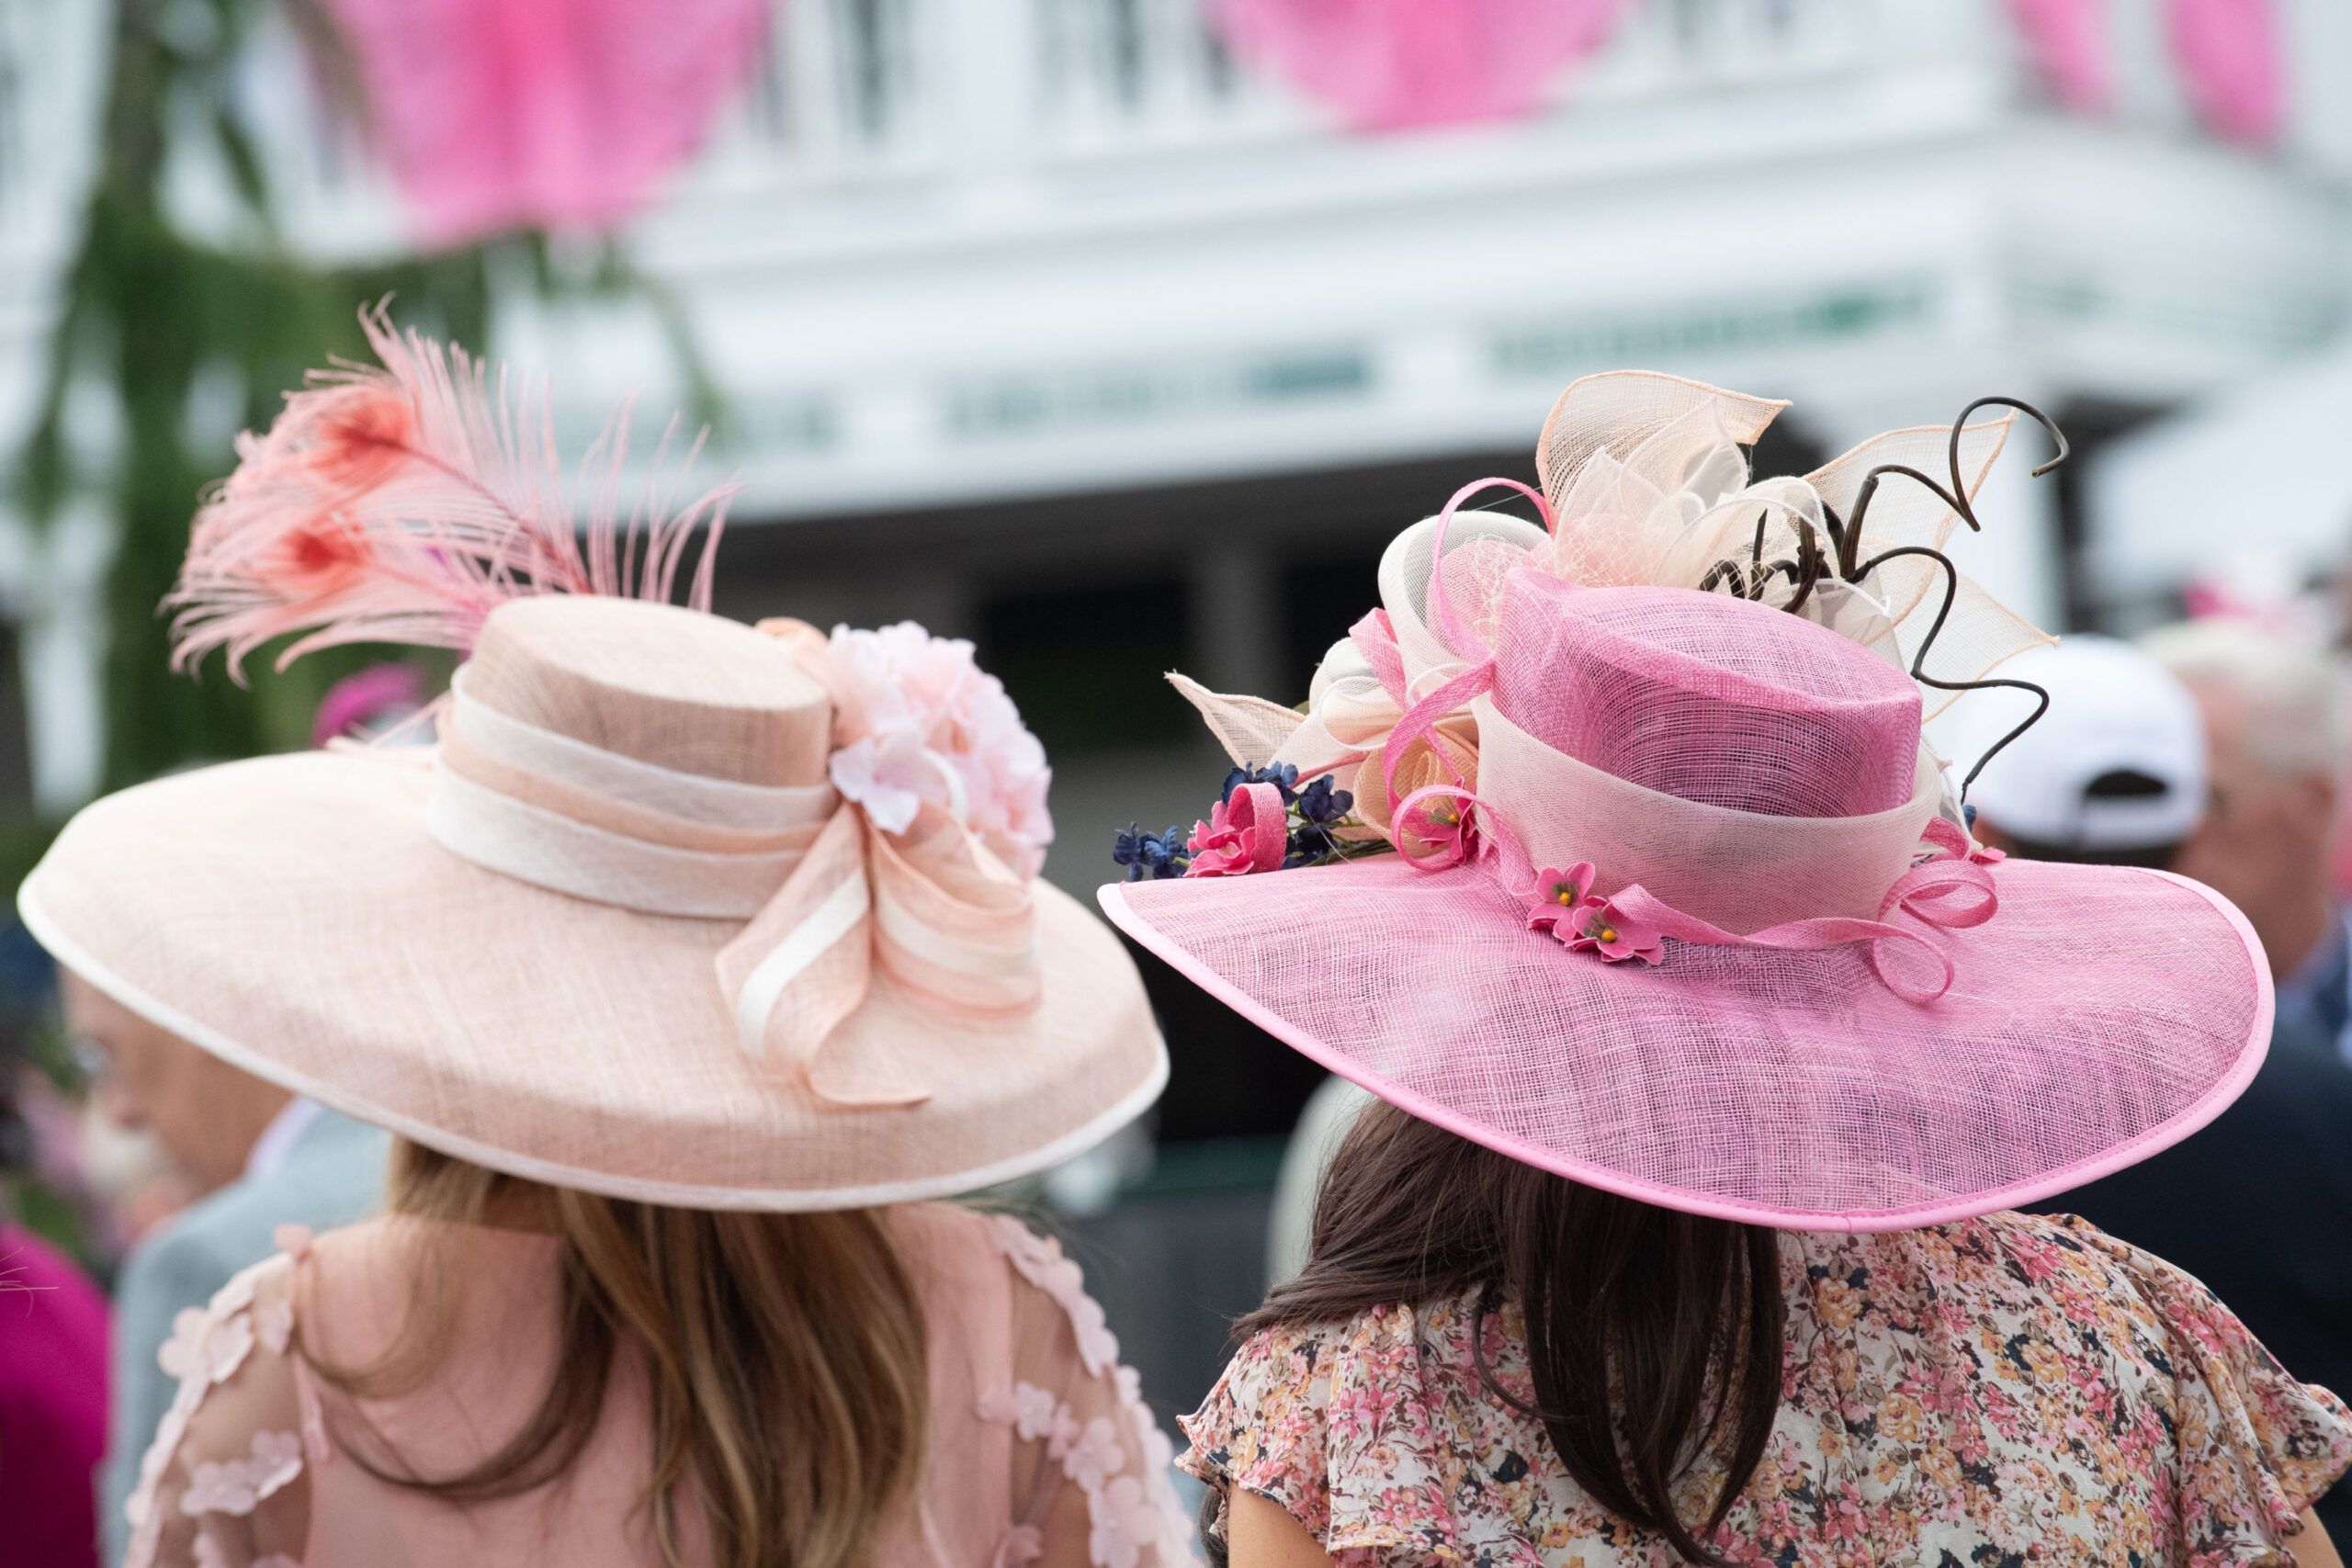 Ladies sporting stylish hats at the horse races